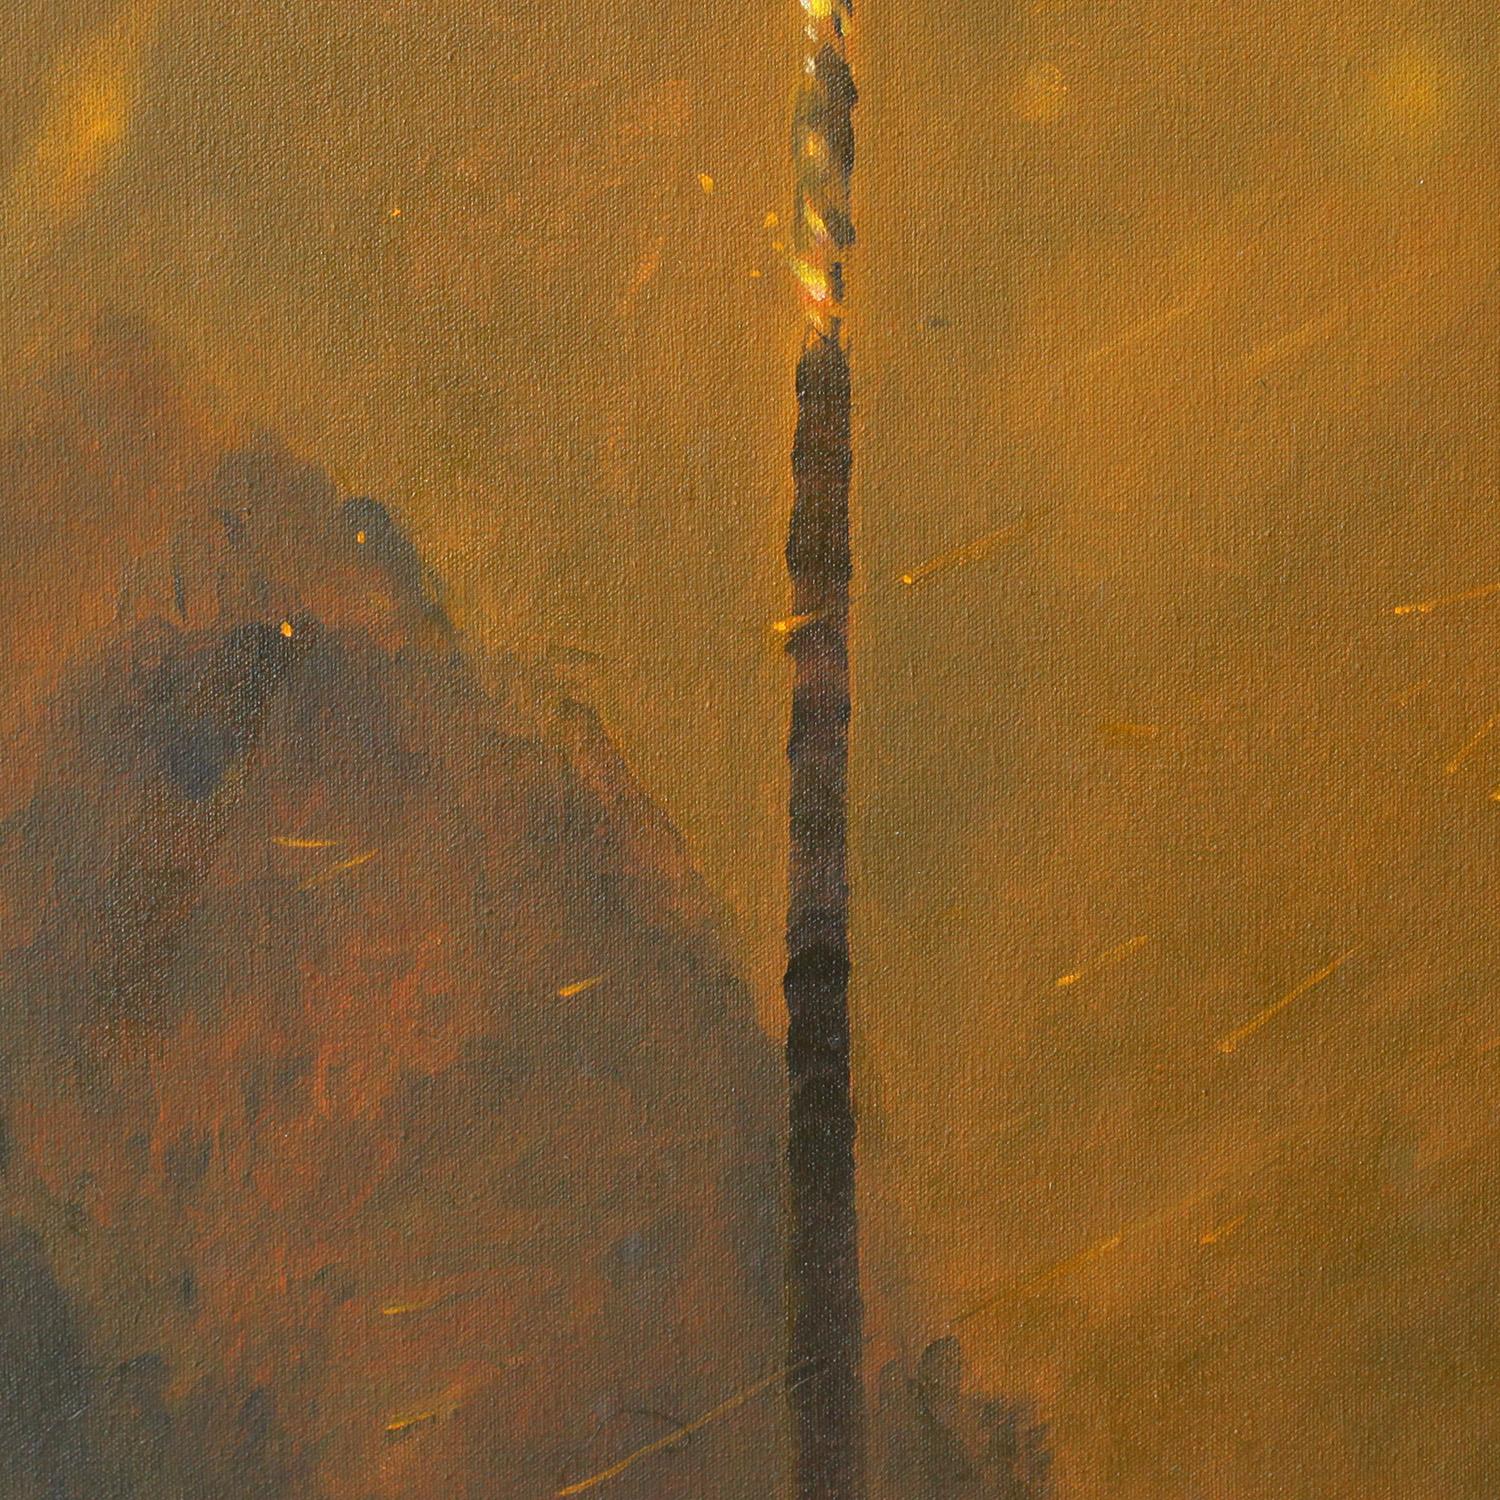 This is a one of a kind conceptual oil painting by local San Diego artist, Perry Vàsquez. Its dimensions are 16 x 48 (LxH). It is not framed. 

The artist has depicted a tall palm tree against an orange- yellow sky. The palm tree is on fire thus the